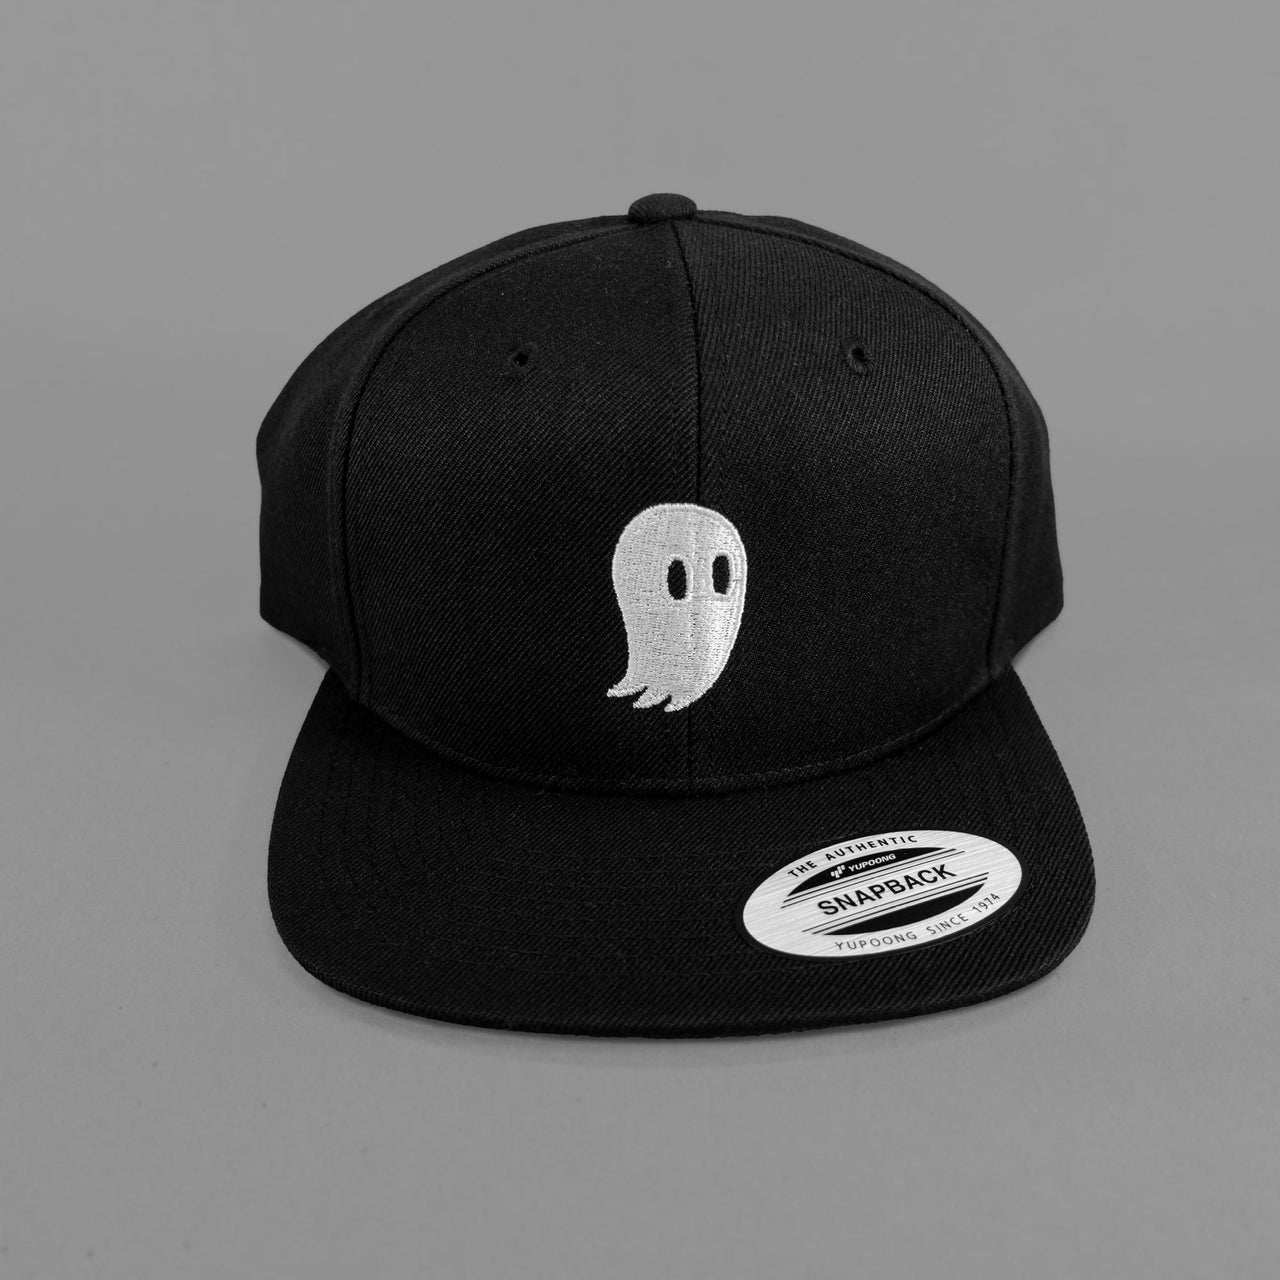 Fred the Ghost | Snapback Hat